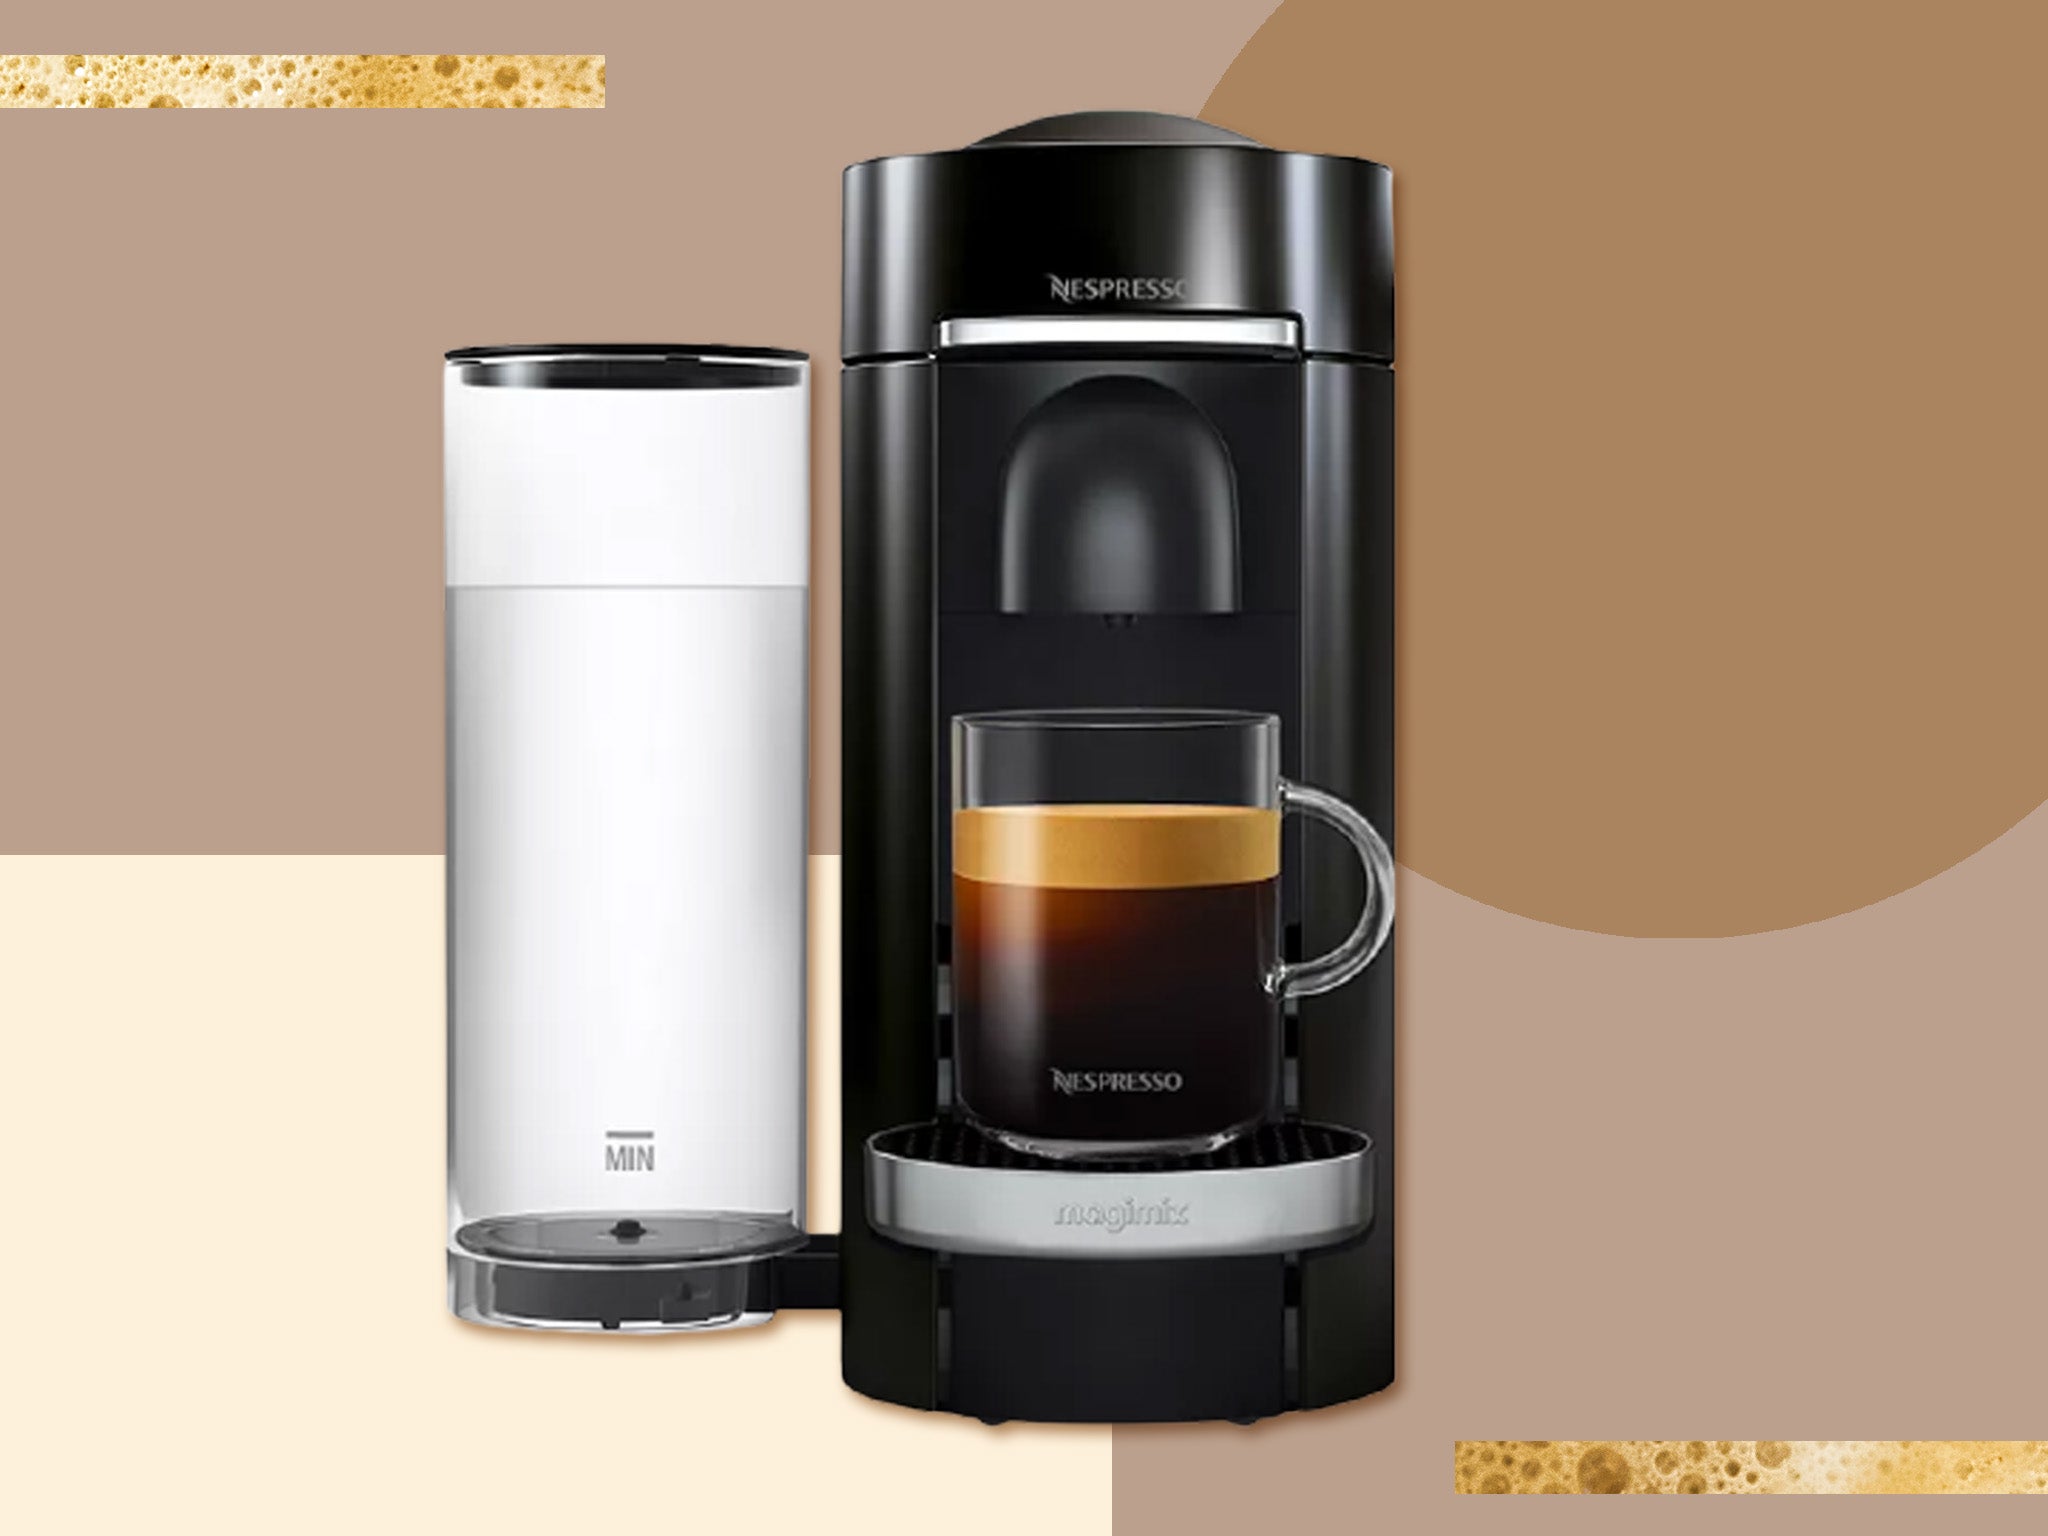 Nespresso pod machines offer a convenient alternative to barista style coffee machines, saving you the hassle of sourcing and grinding fresh coffee beans